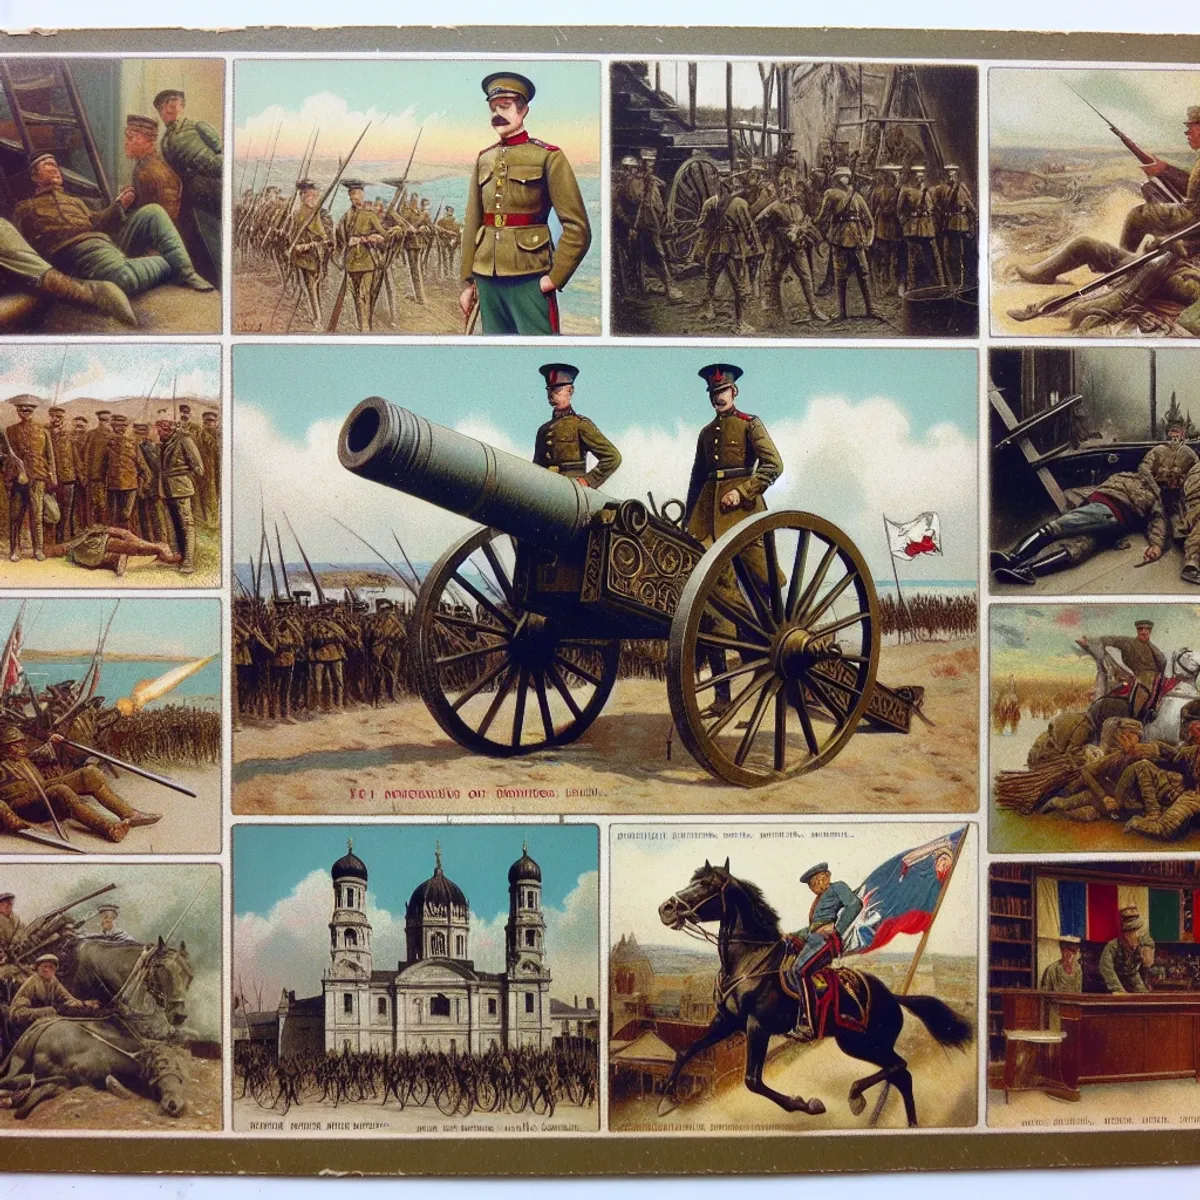 Vintage military postcards from early 1900s showcasing soldiers, battlefield action, and symbolic landmarks.